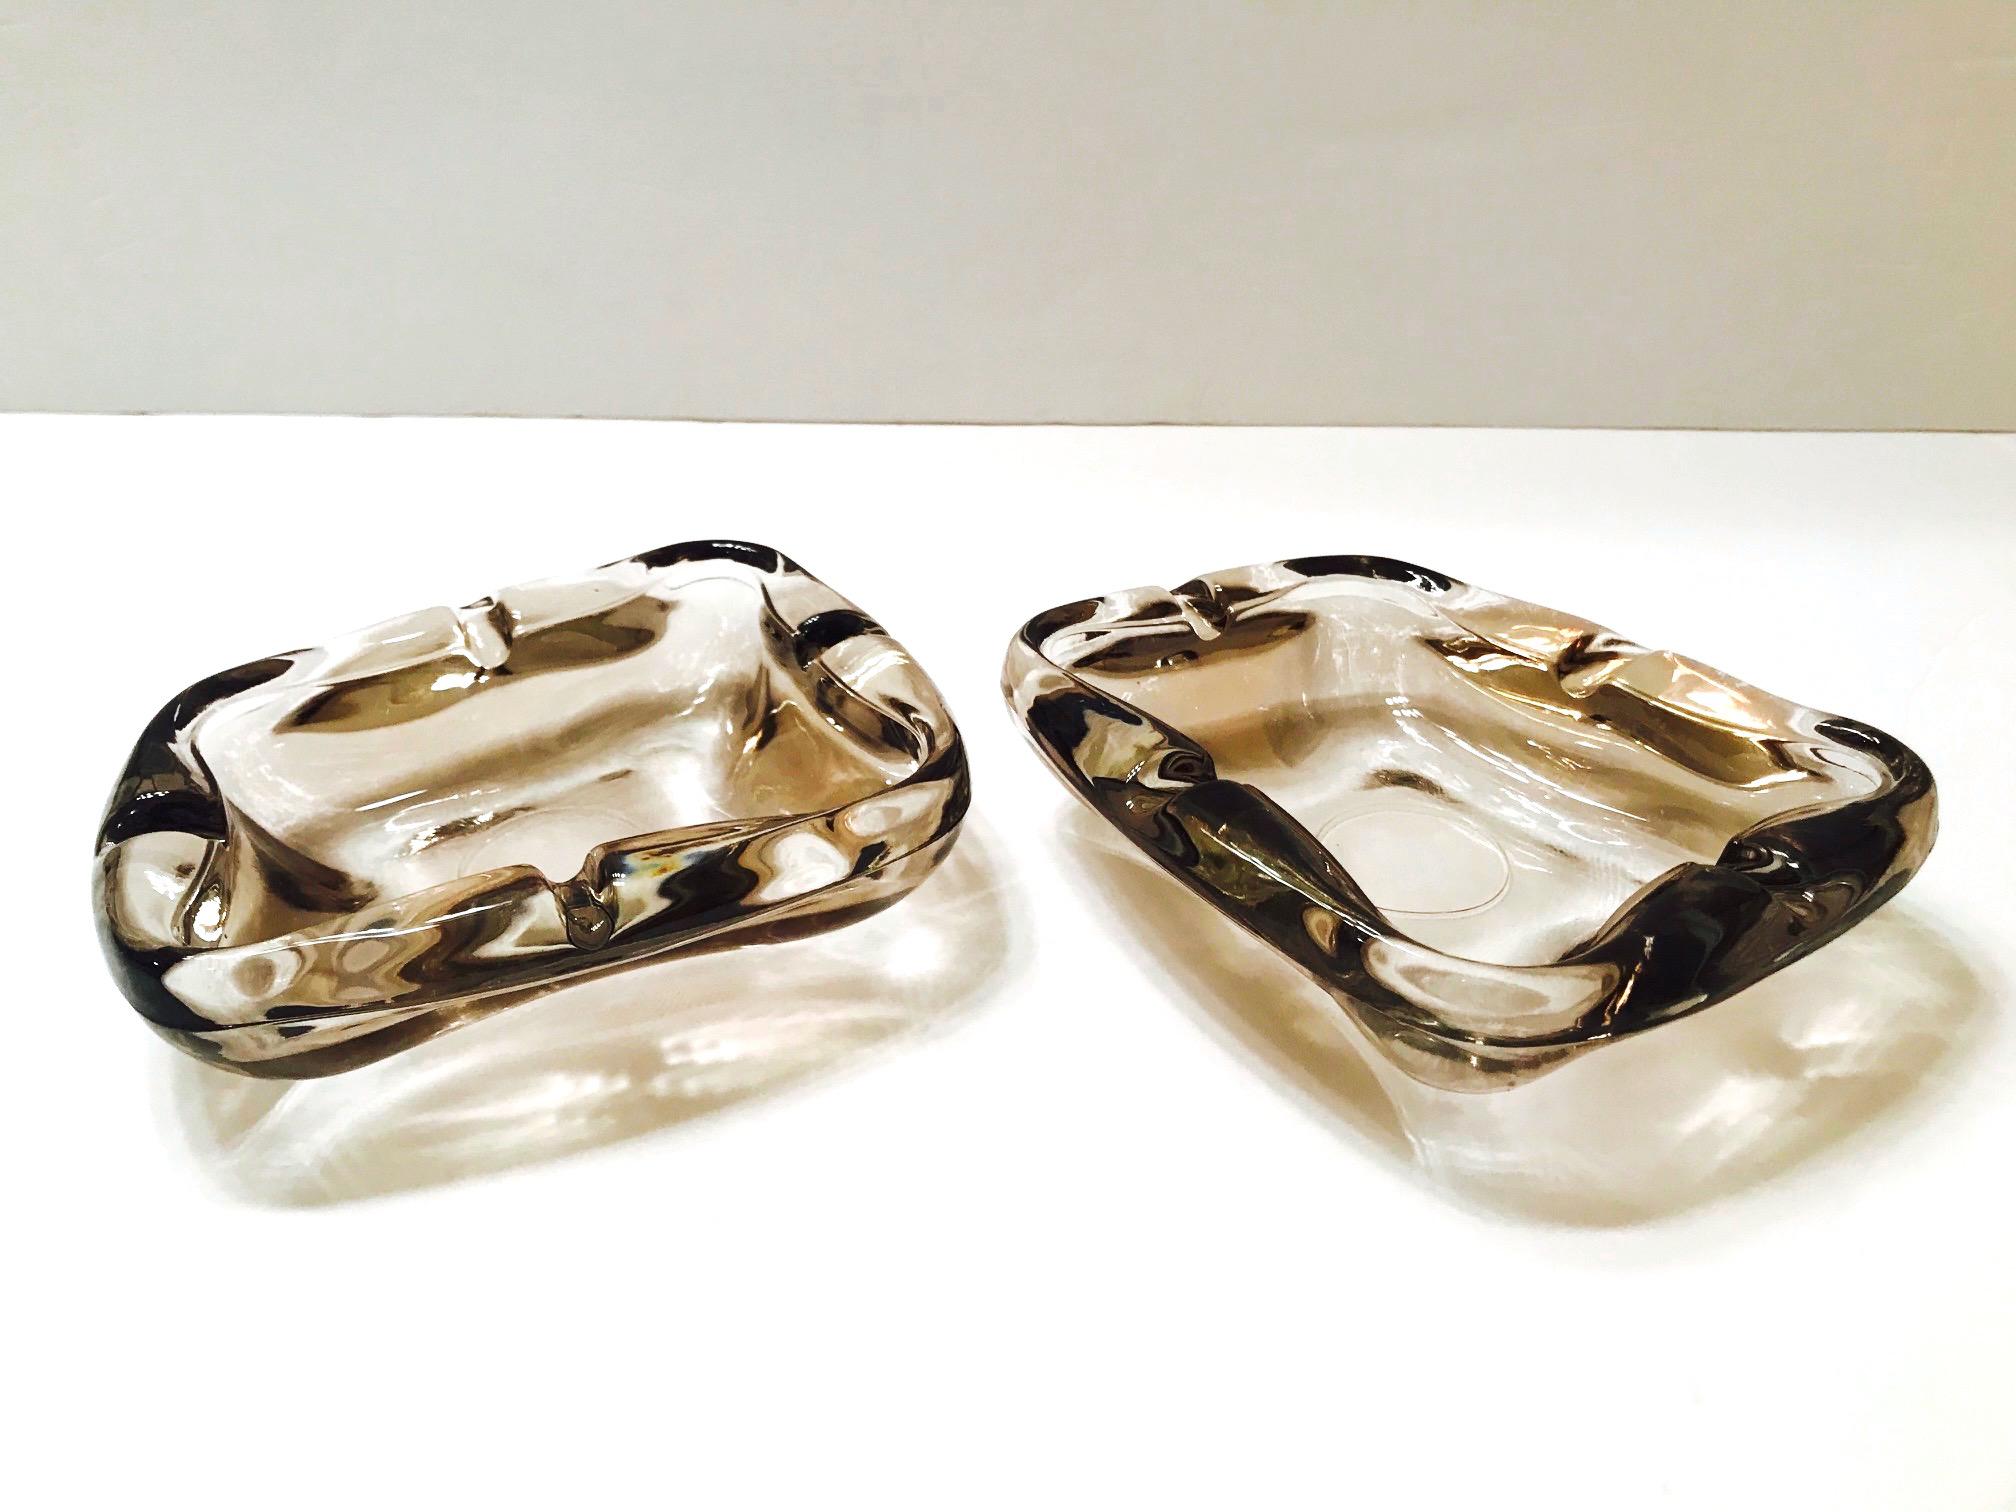 Hand-Crafted Pair of French Mid-Century Modern Smoked Iridescent Glass Ashtrays, 1960s